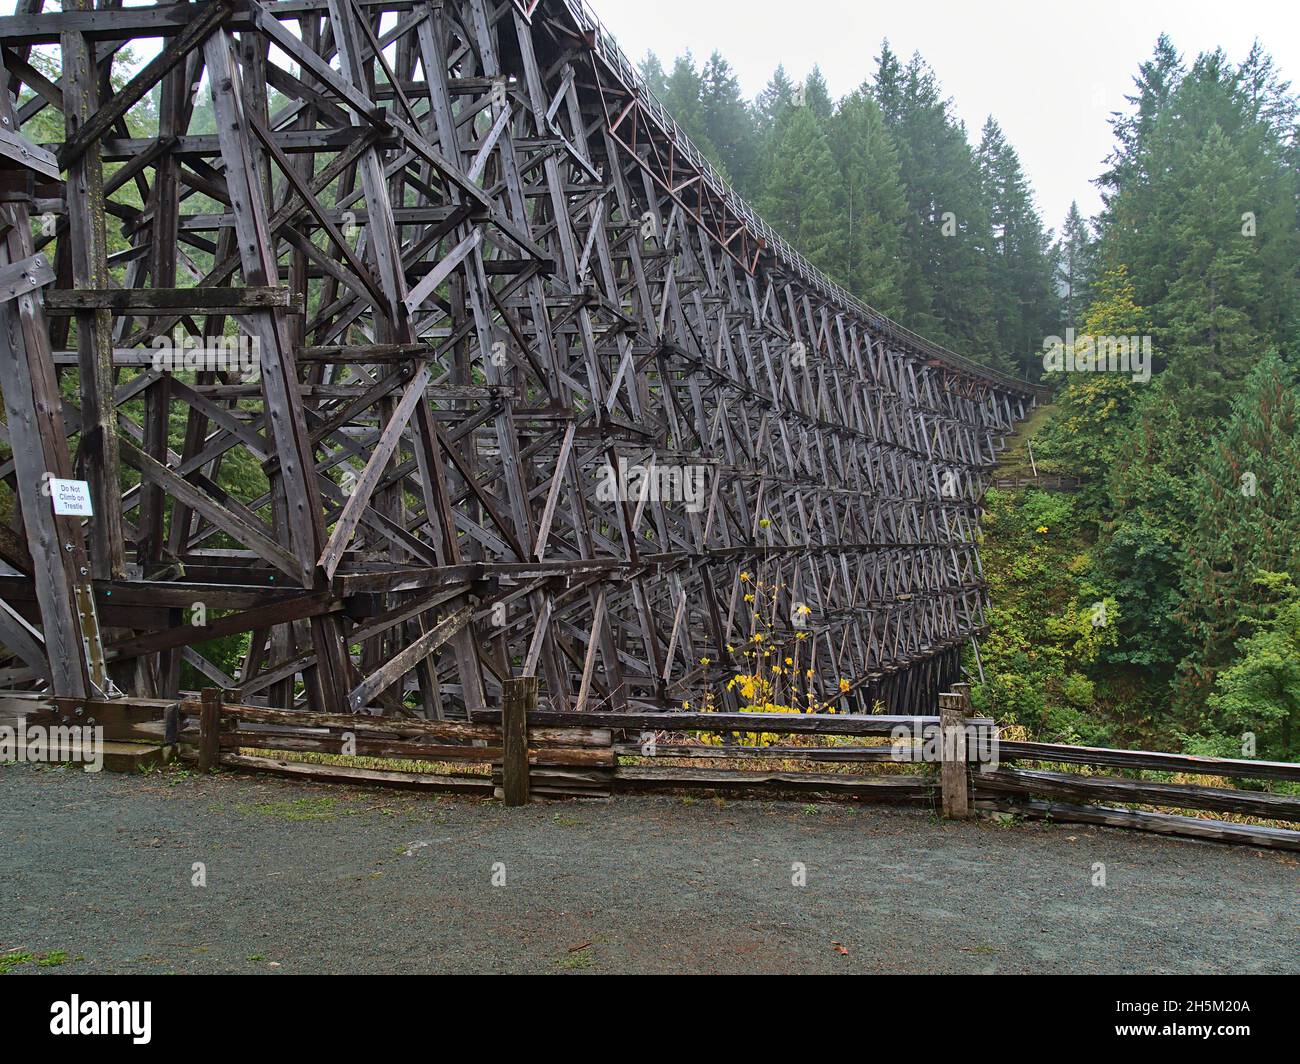 View of restored historic railroad bridge Kinsol Trestle made of wooden boards surrounded by dense forest on Vancouver Island, BC, Canada. Stock Photo